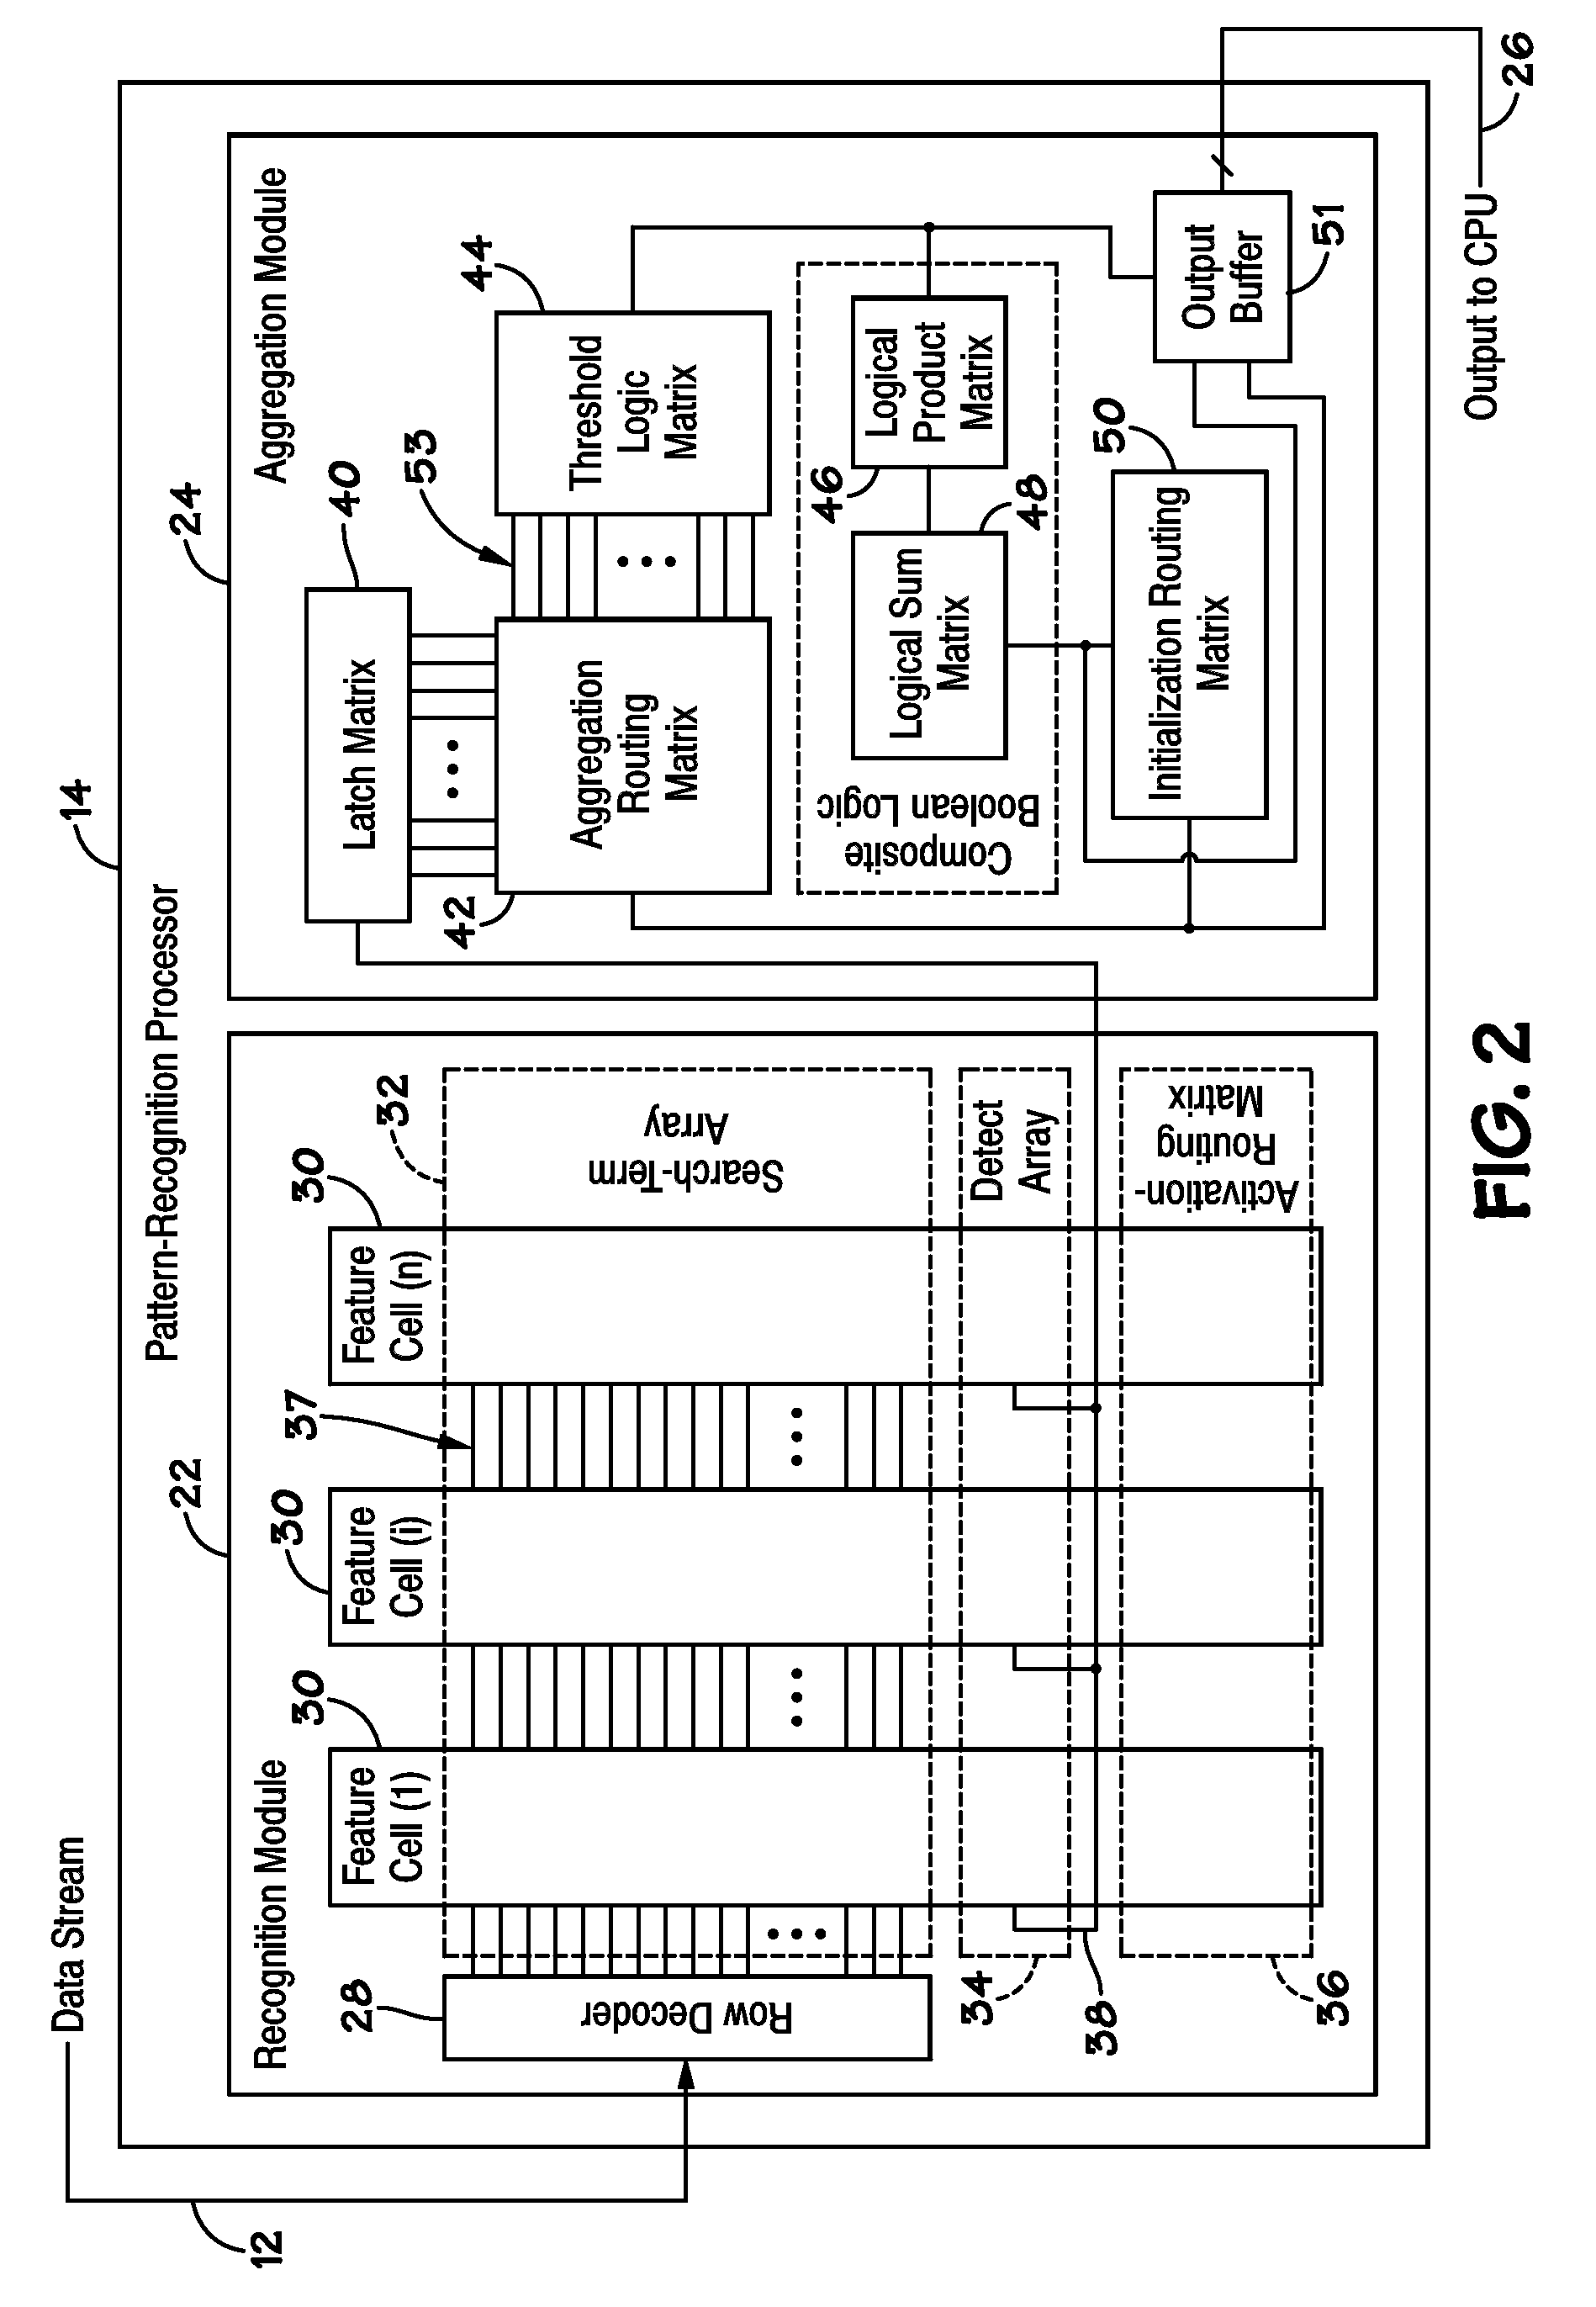 Method and Systems for Power Consumption Management of a Pattern-Recognition Processor